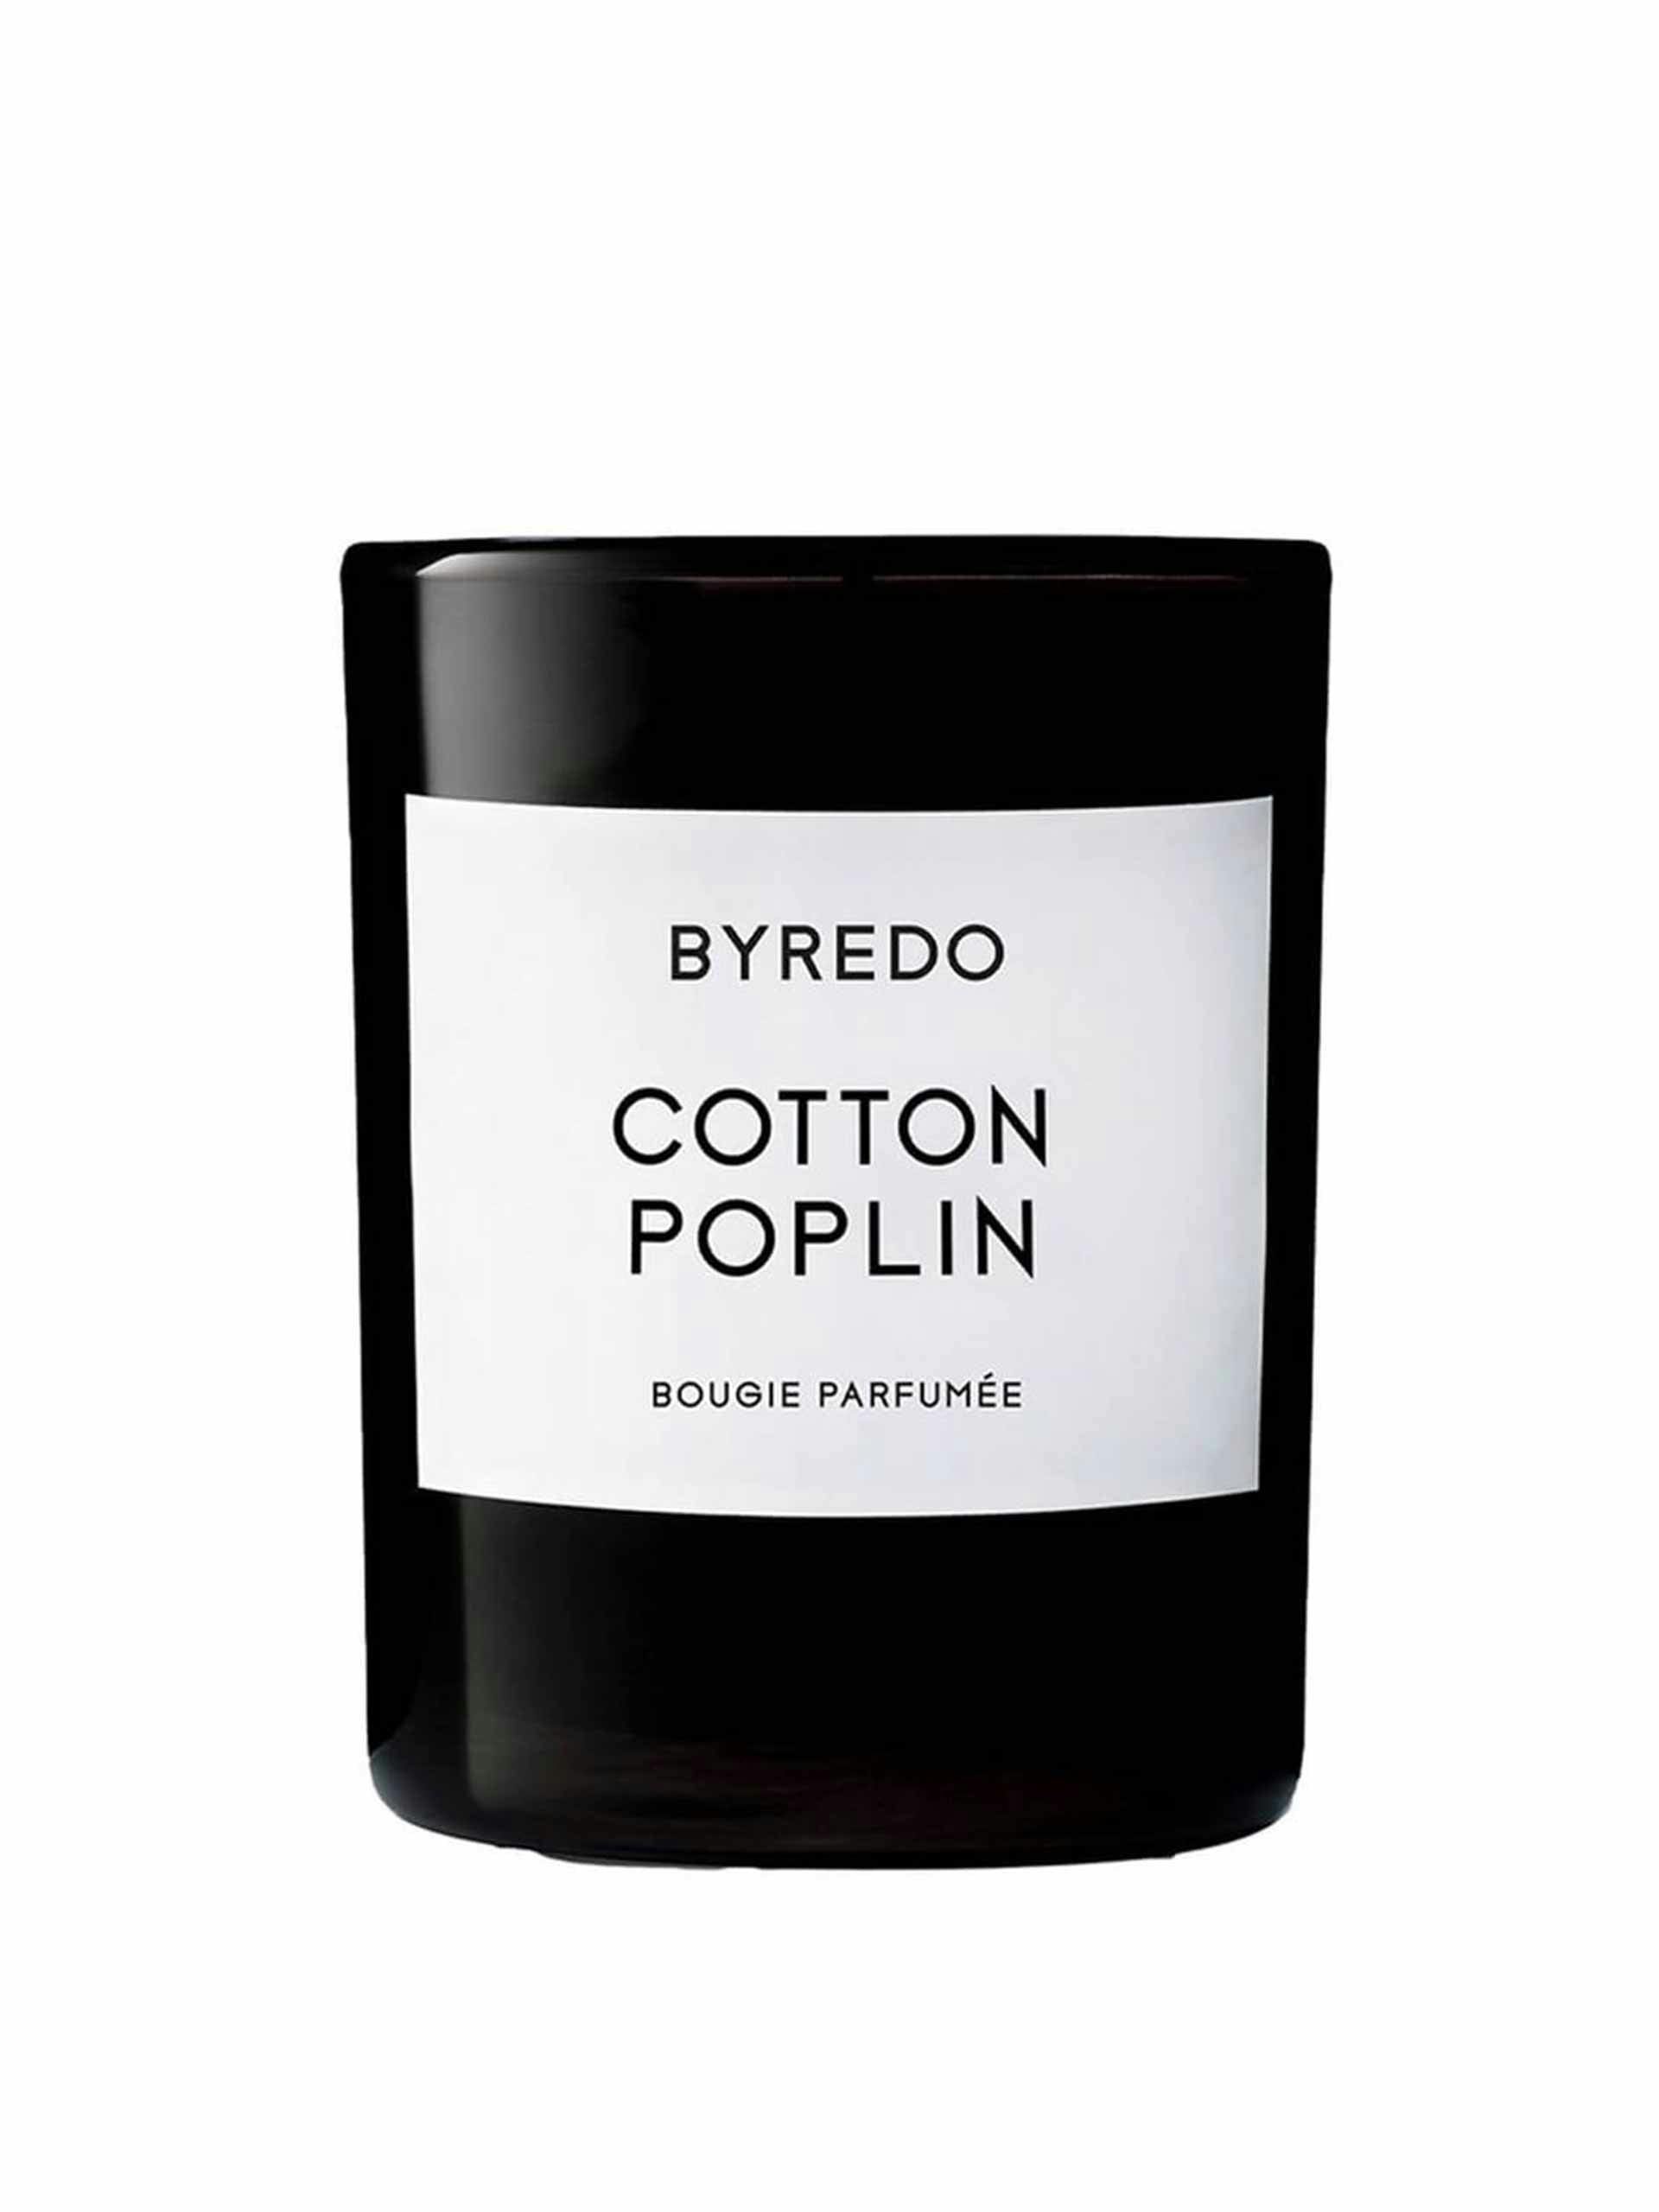 Cotton poplin scented candle